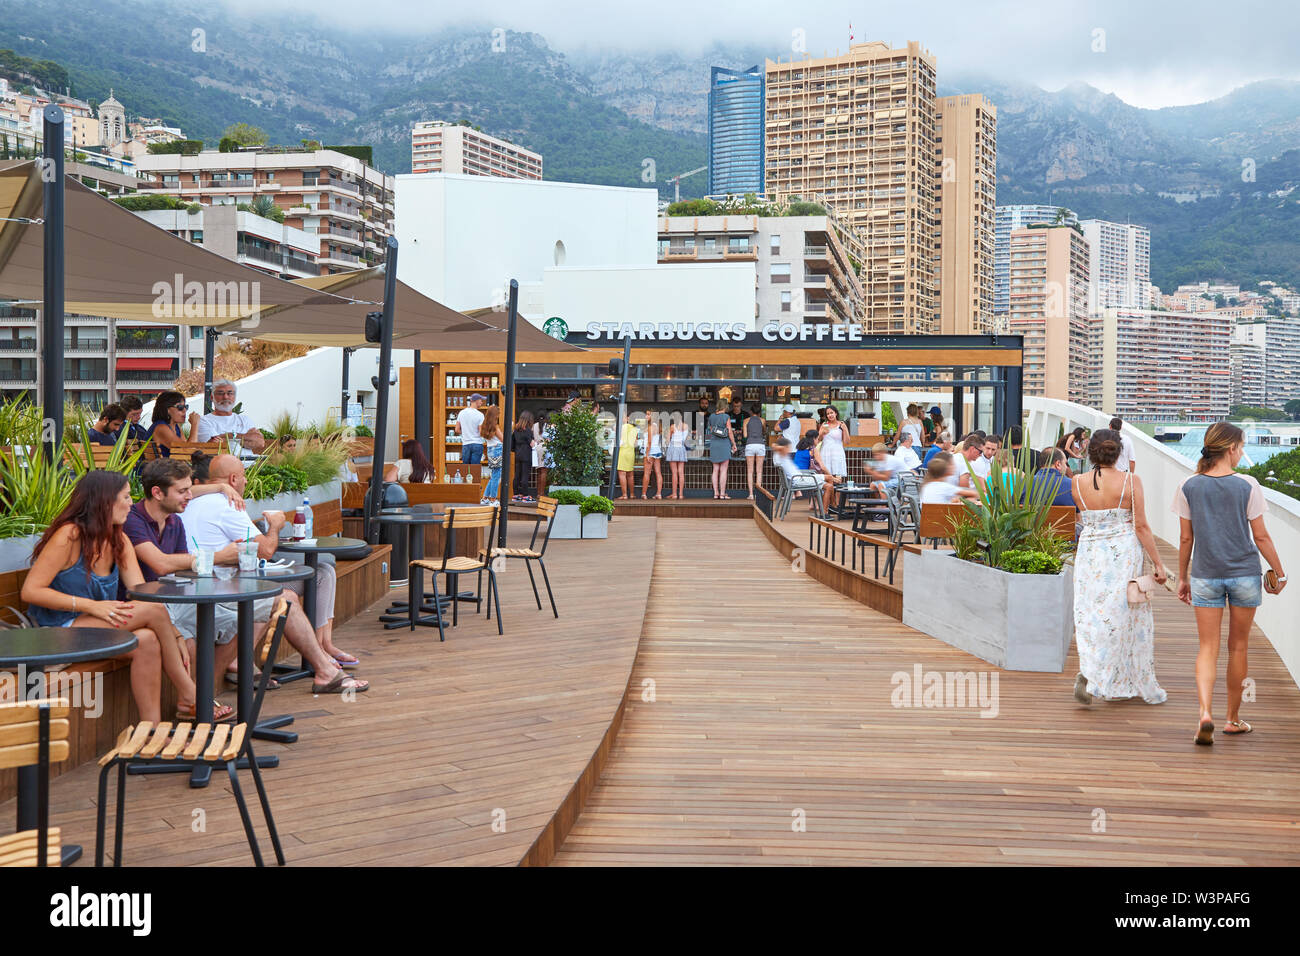 MONTE CARLO, MONACO - AUGUST 19, 2016: Starbucks Coffee cafe terrace with people in a summer day in Monte Carlo, Monaco. Stock Photo